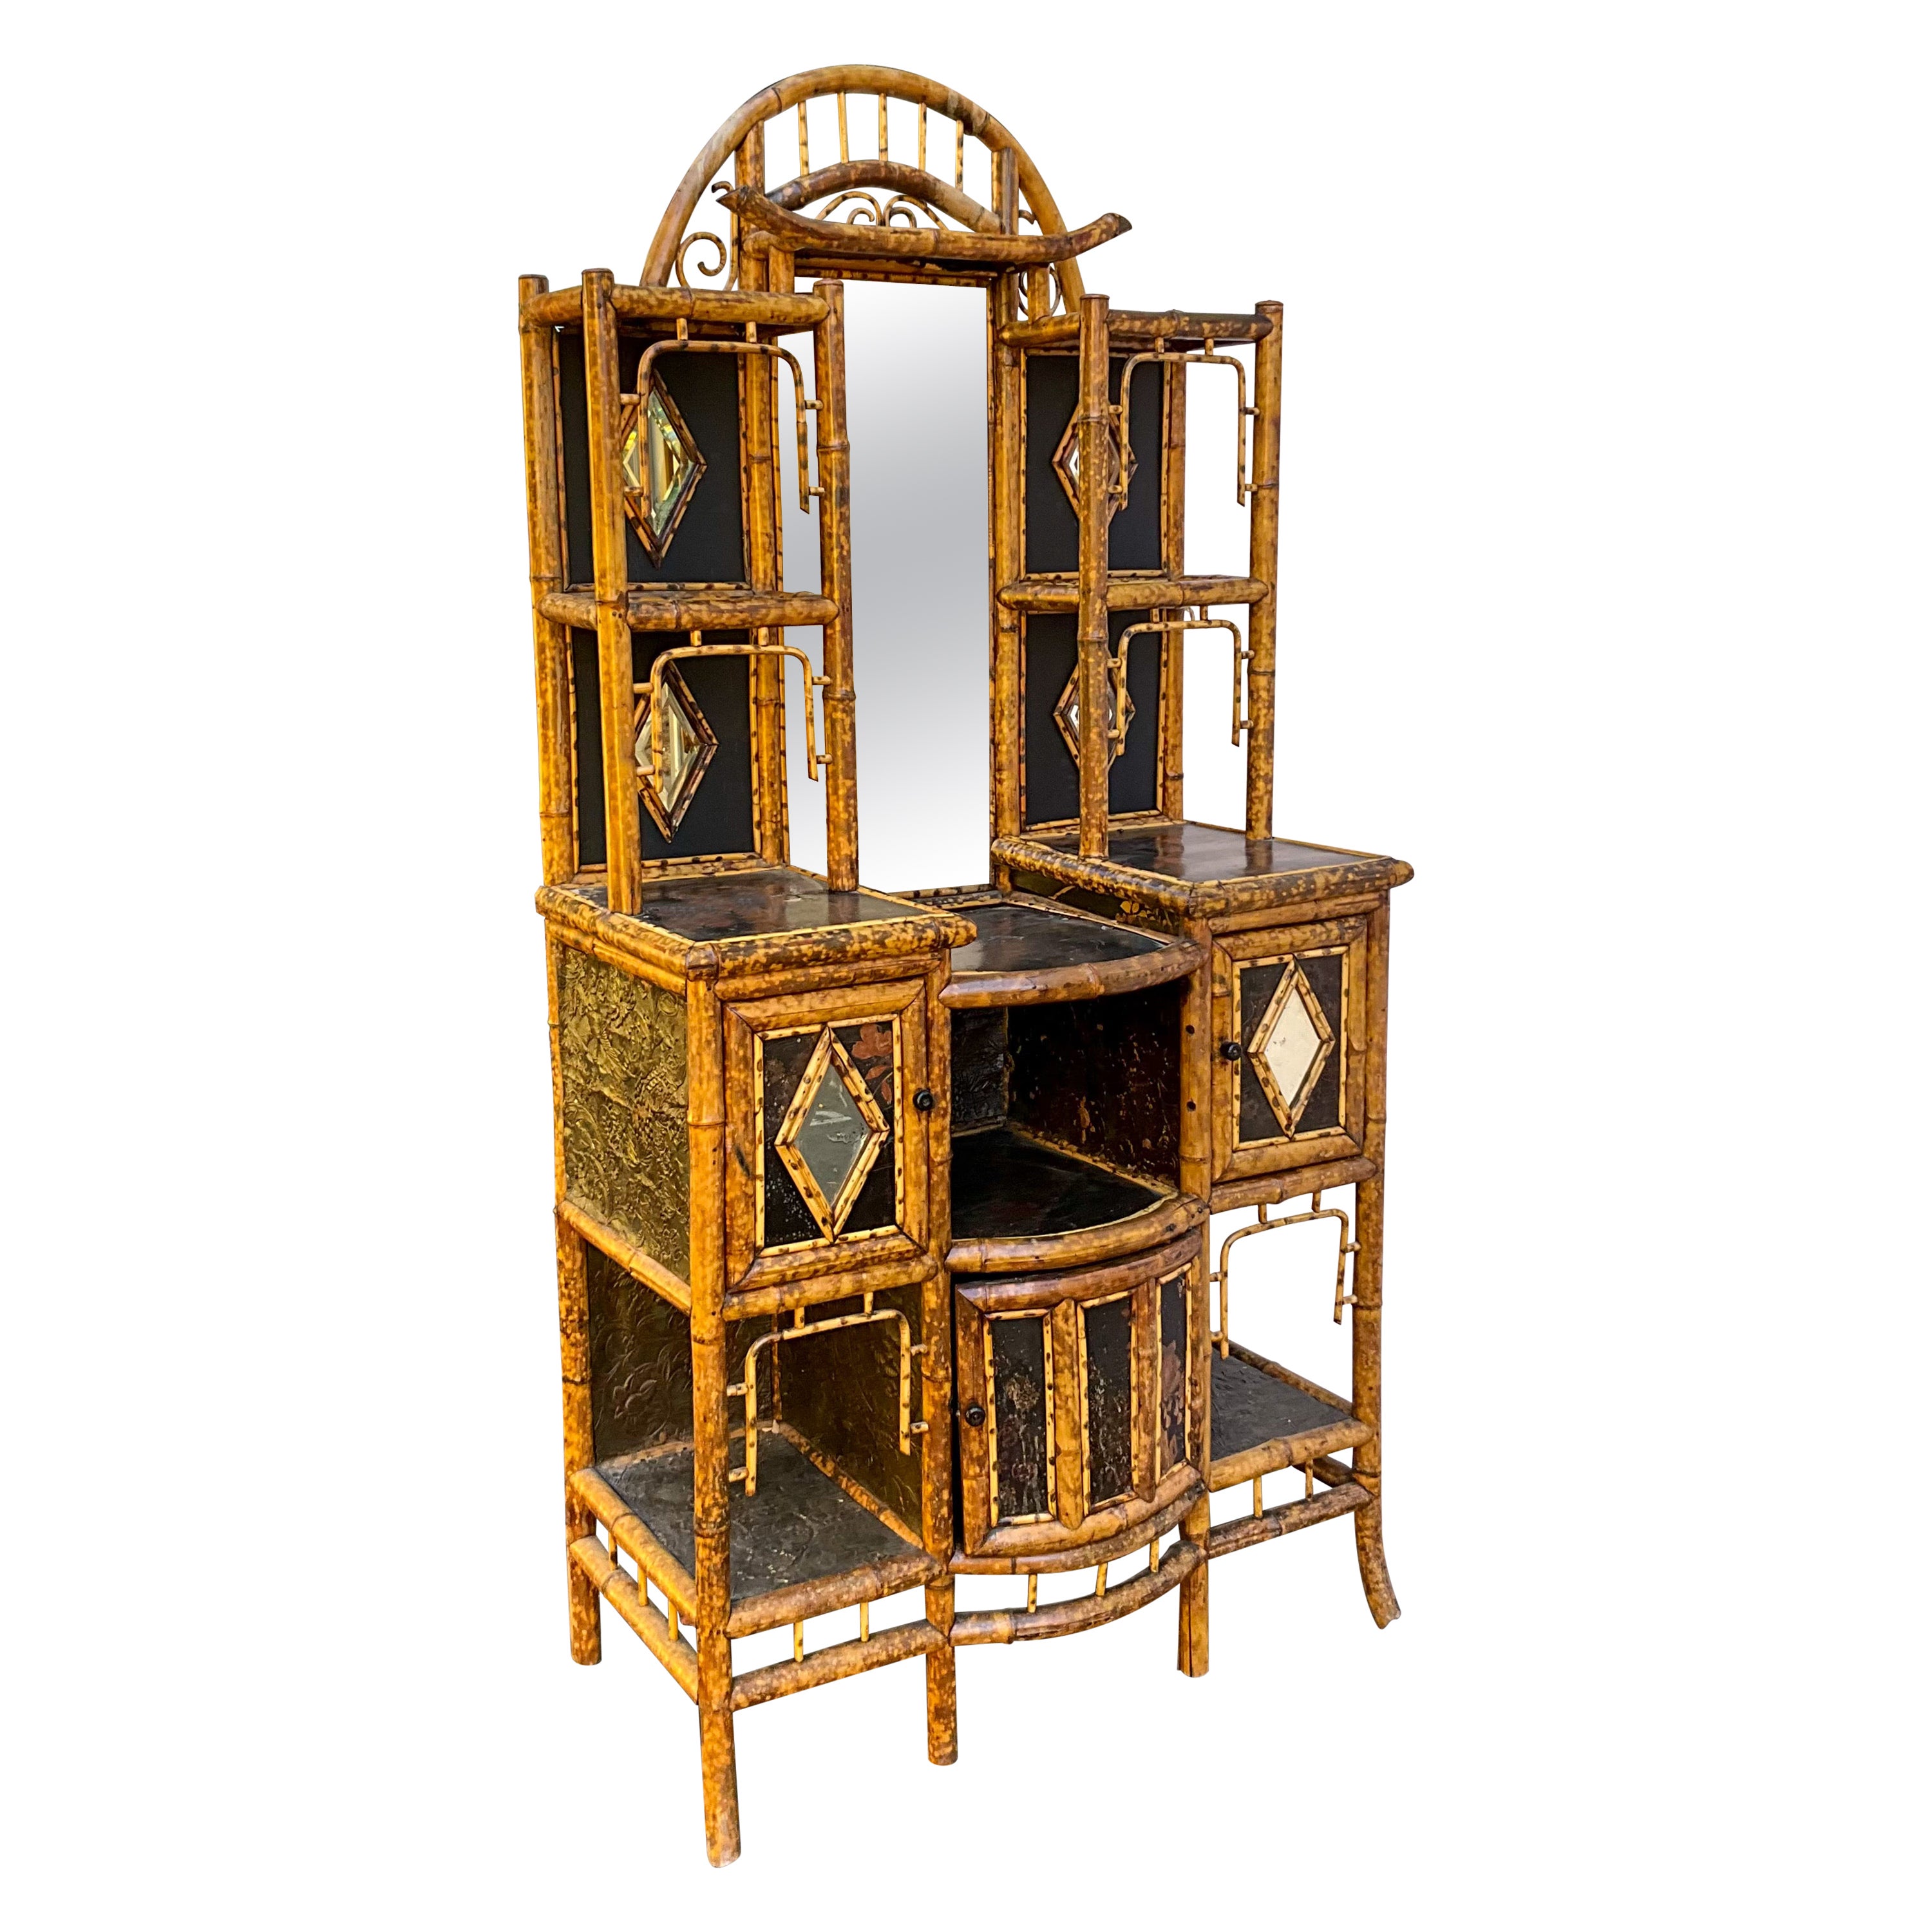 19th-C. English Aesthetic Movement Bamboo & Lacquer Cabinet / Etagere / Vanity 